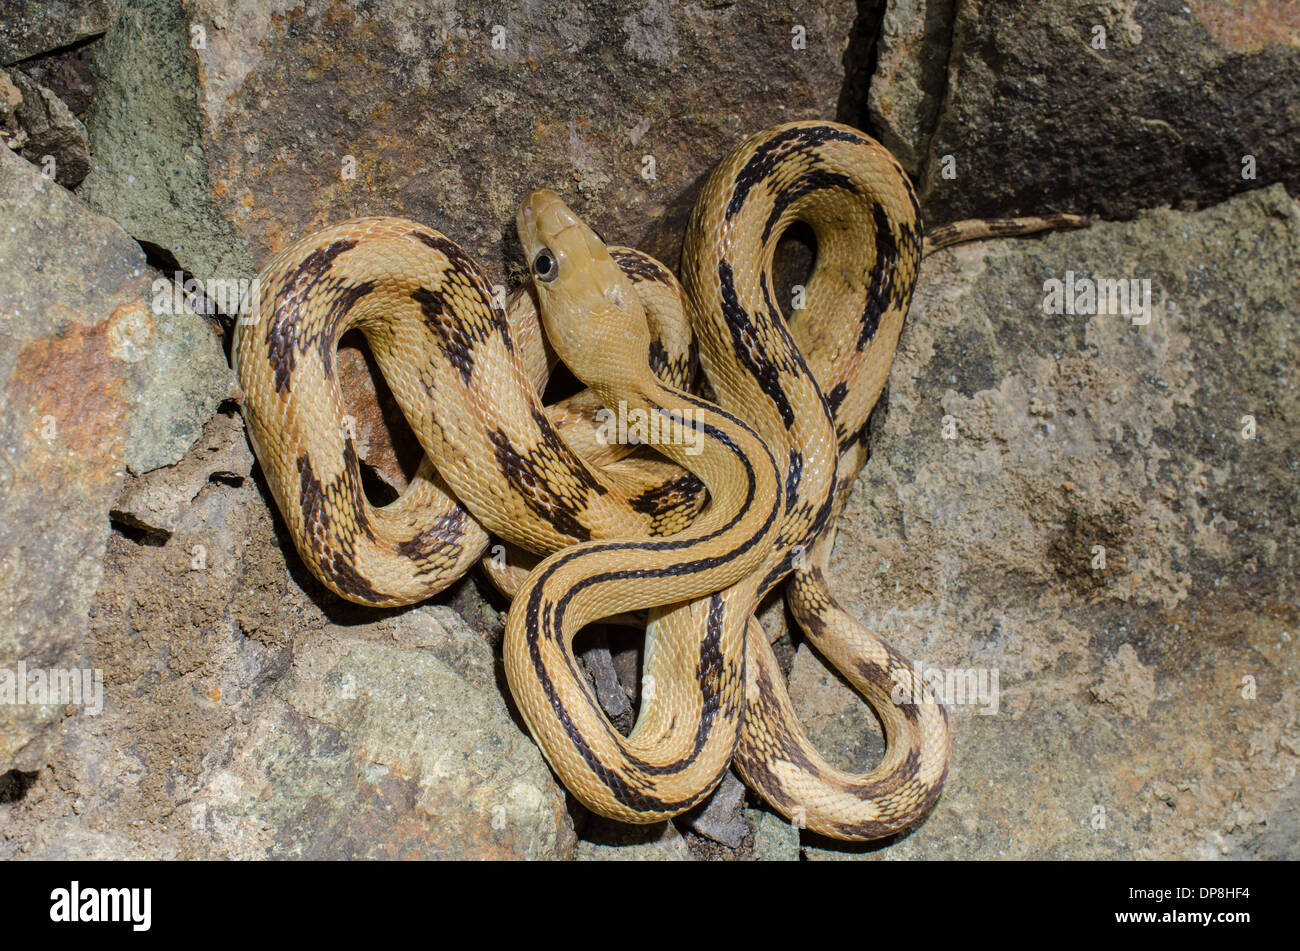 Norther Trans-pecos Ratsnake, (Bogertophis suboculatis subocularis), Sierra co., New Mexico, USA. Stock Photo